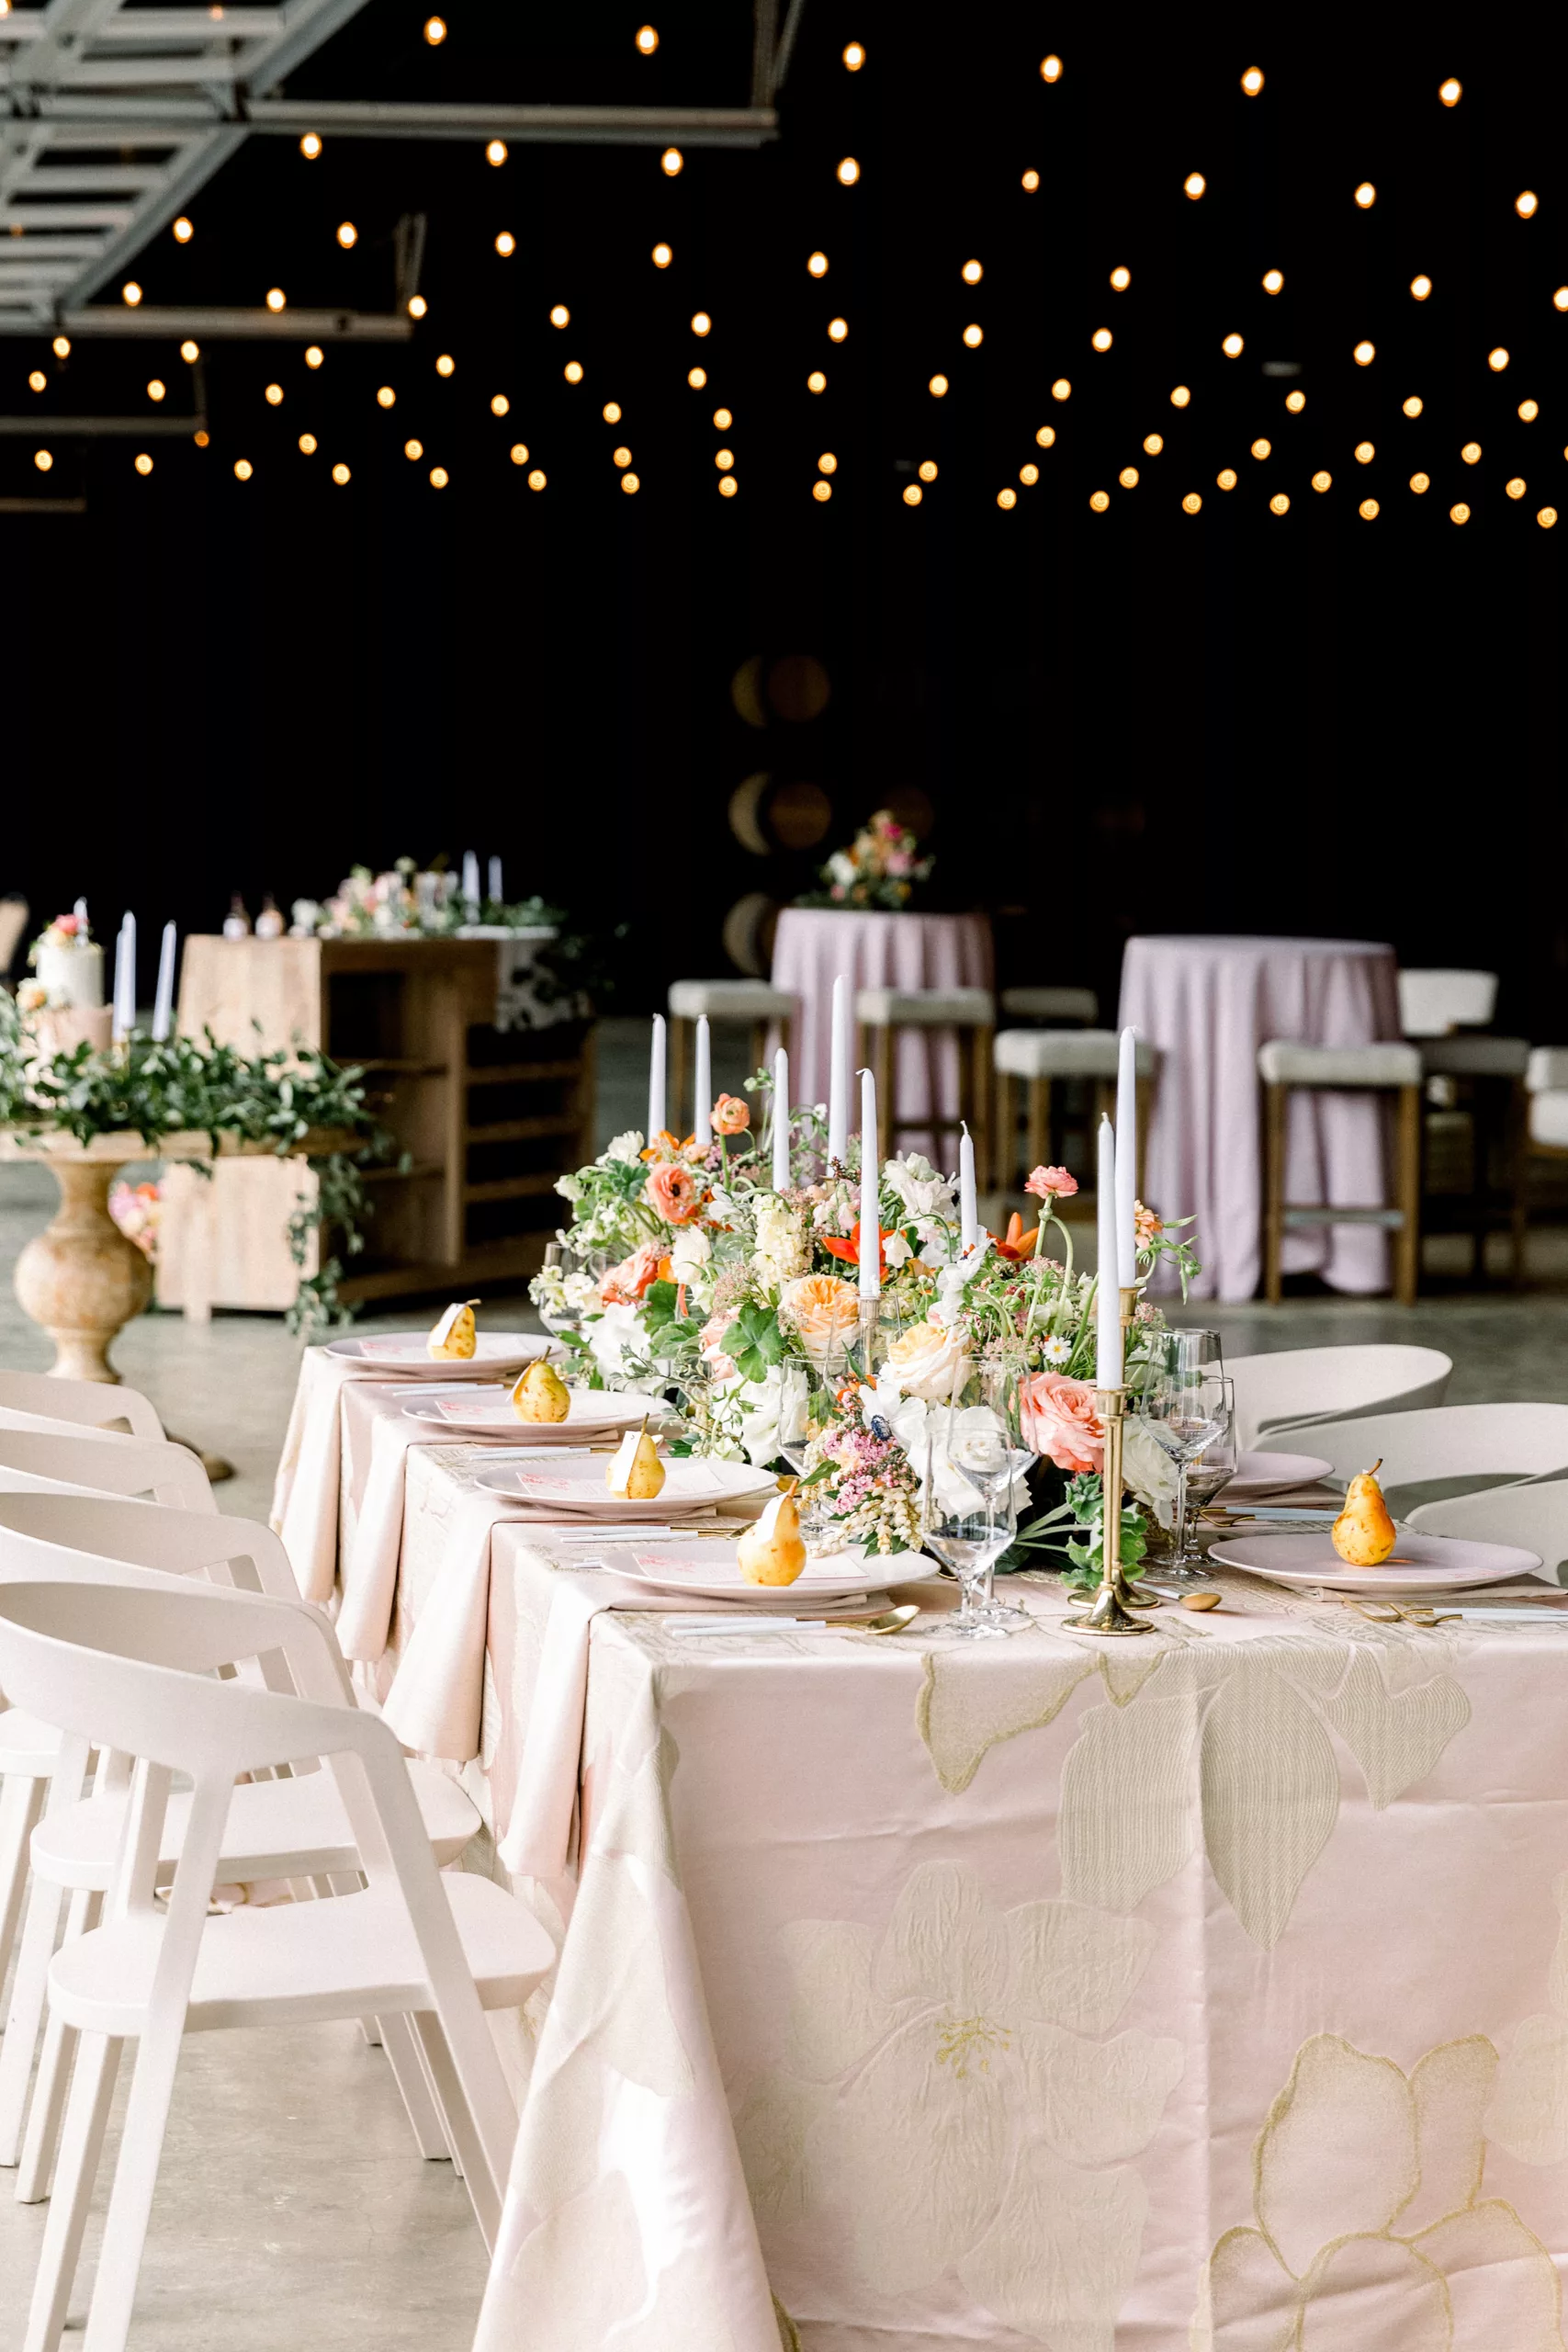 Details of a wedding reception table covered in flowers